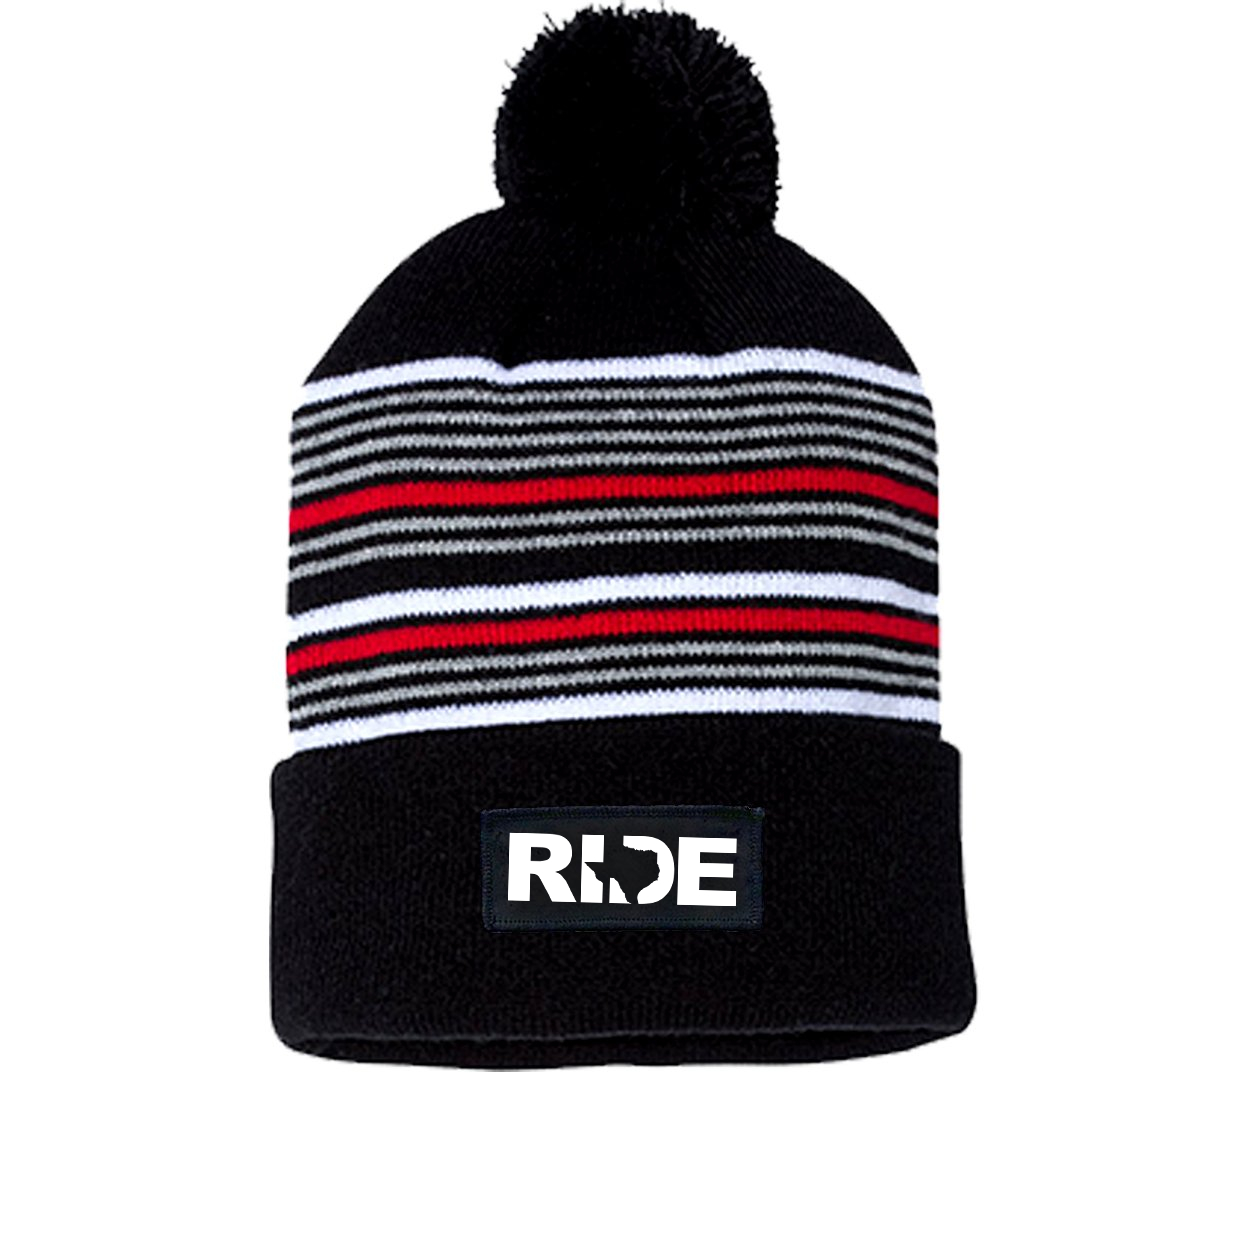 Ride Texas Night Out Woven Patch Roll Up Pom Knit Beanie Black/ White/ Grey/ Red Beanie (White Logo)